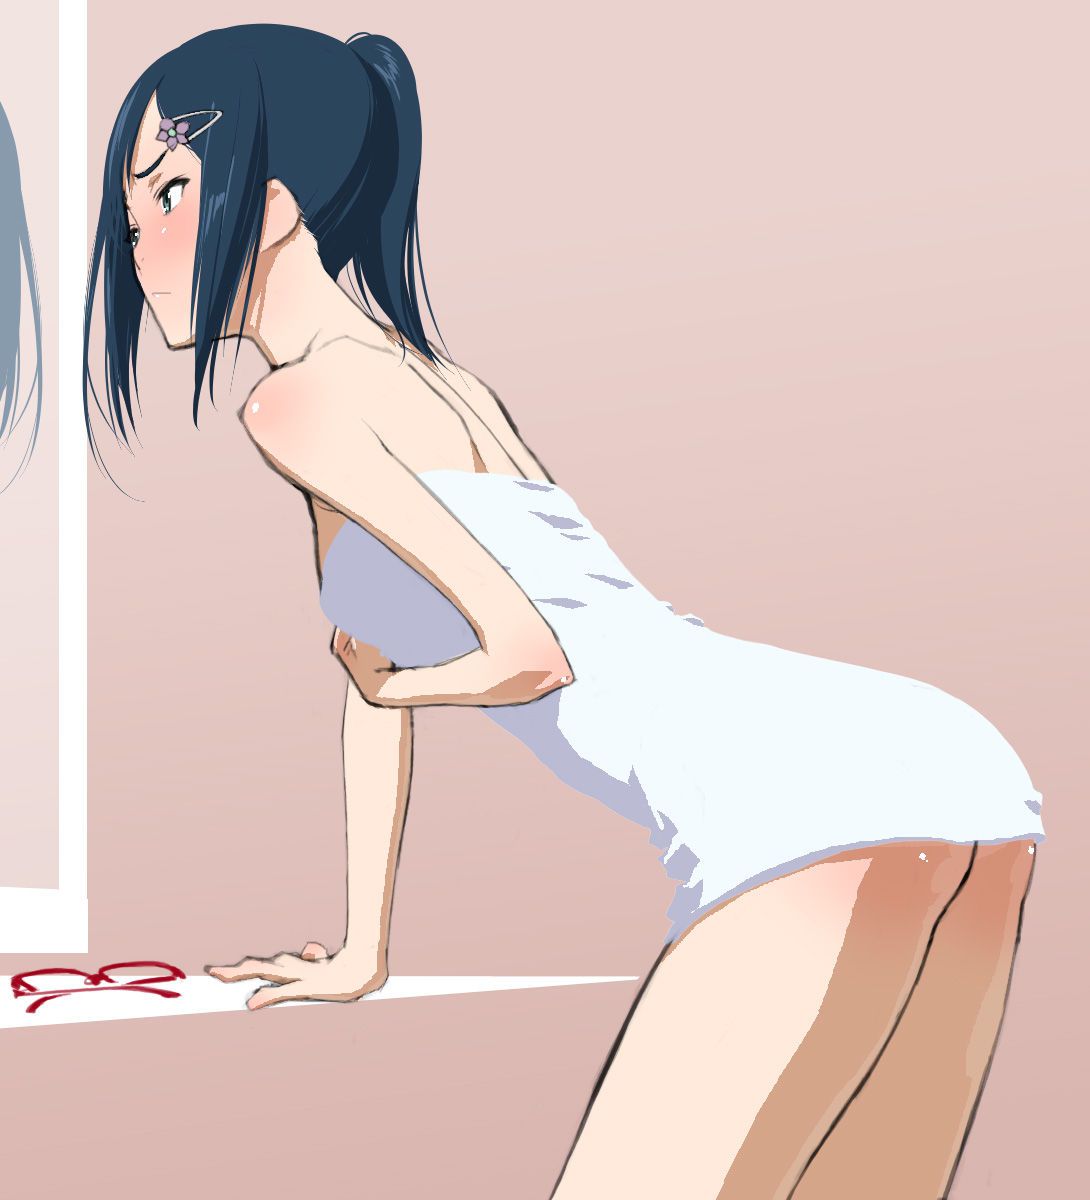 【Erotic Anime Summary】 Girls whose are small but exude eroticism 【Secondary erotica】 7